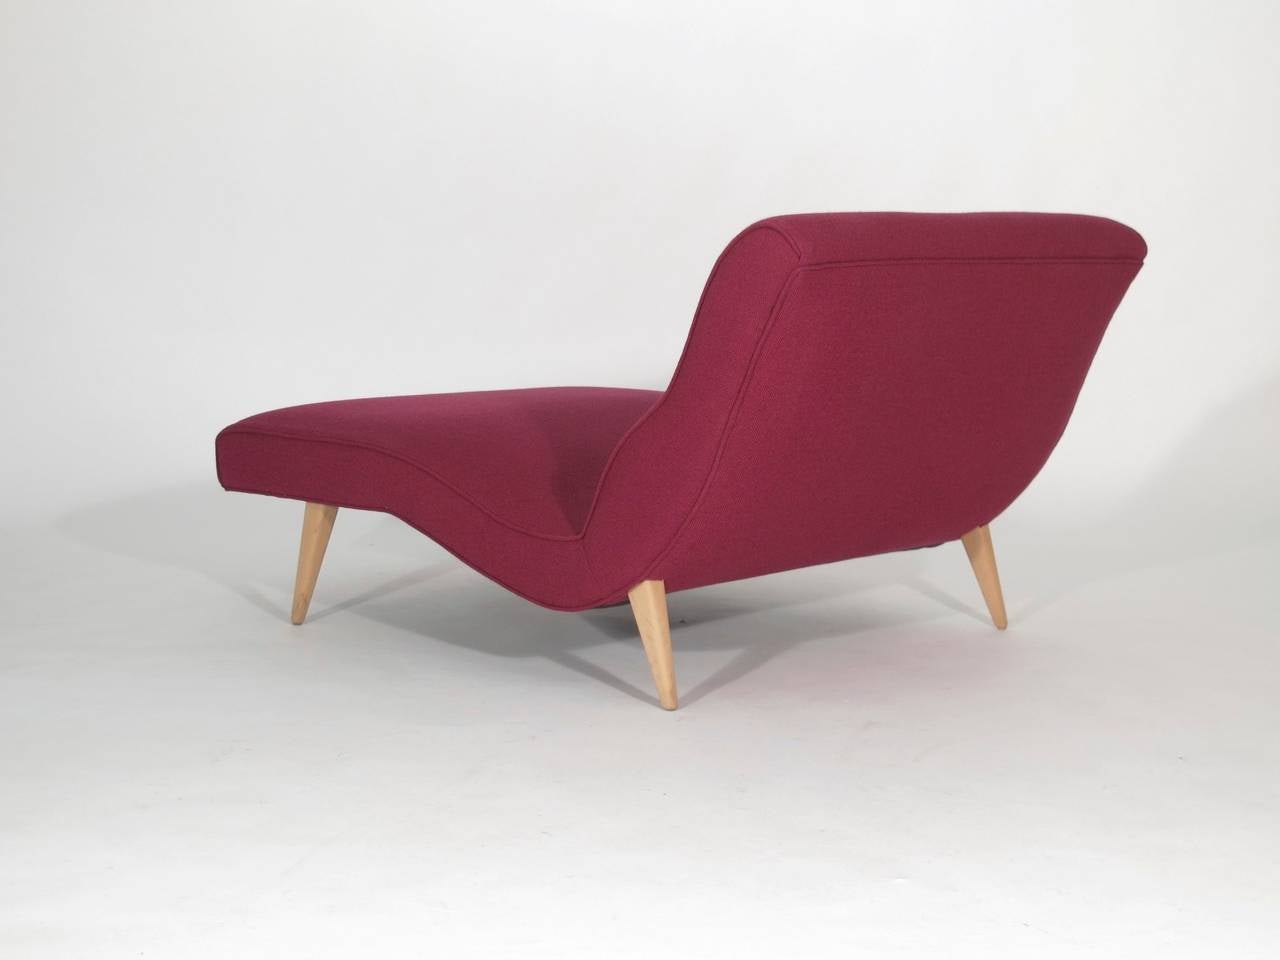 American Mid-Century Chaise Lounge in Manner of Adrian Pearsall